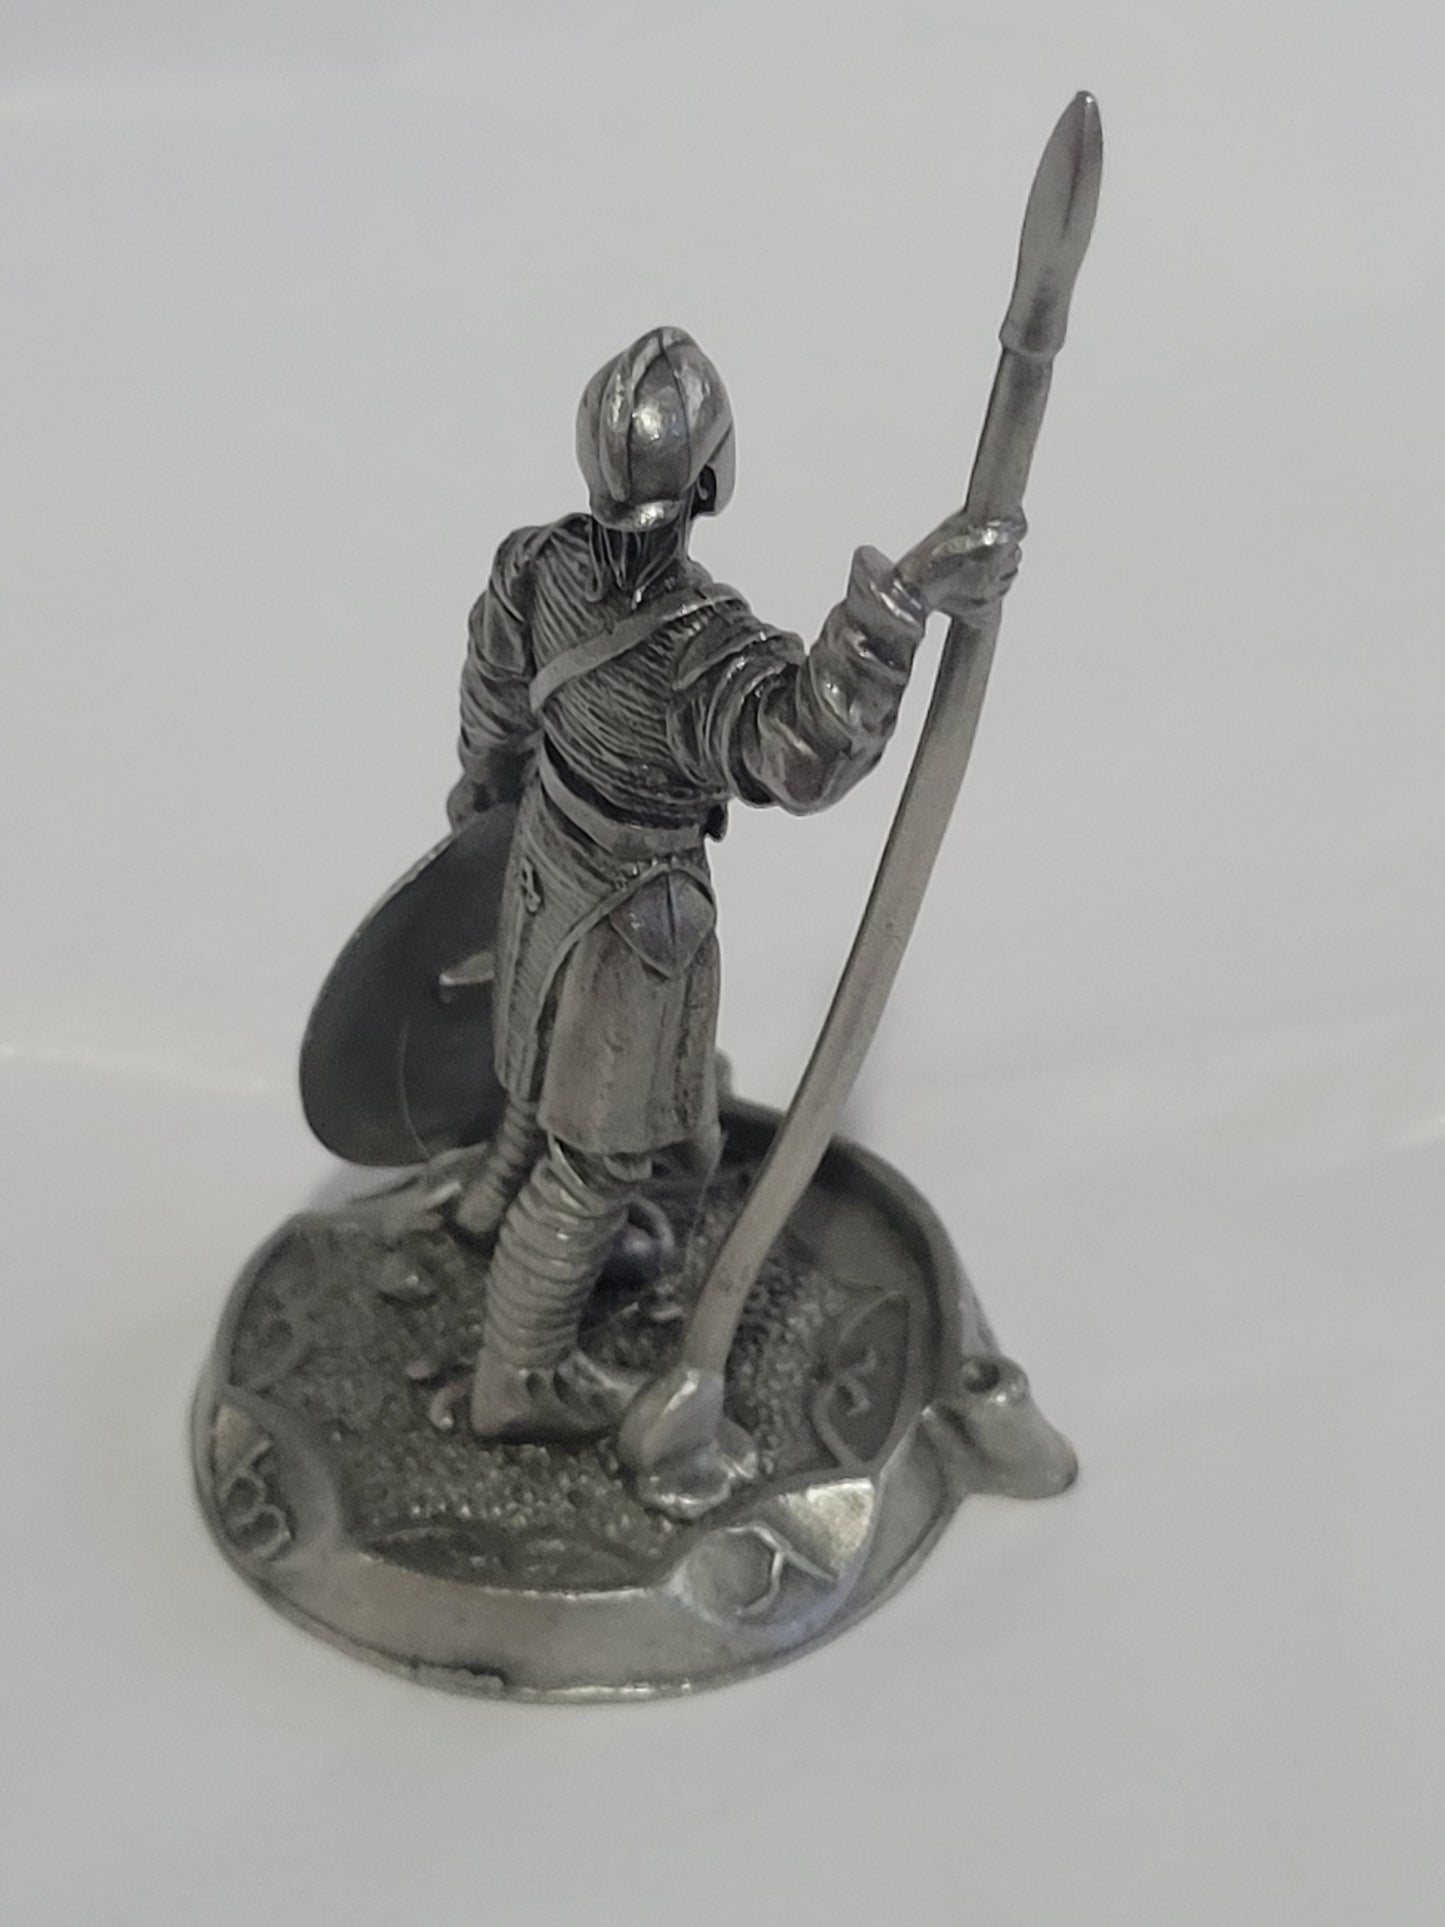 Eomer from the Lord of the Rings by Rawcliffe, Pewter Figurine